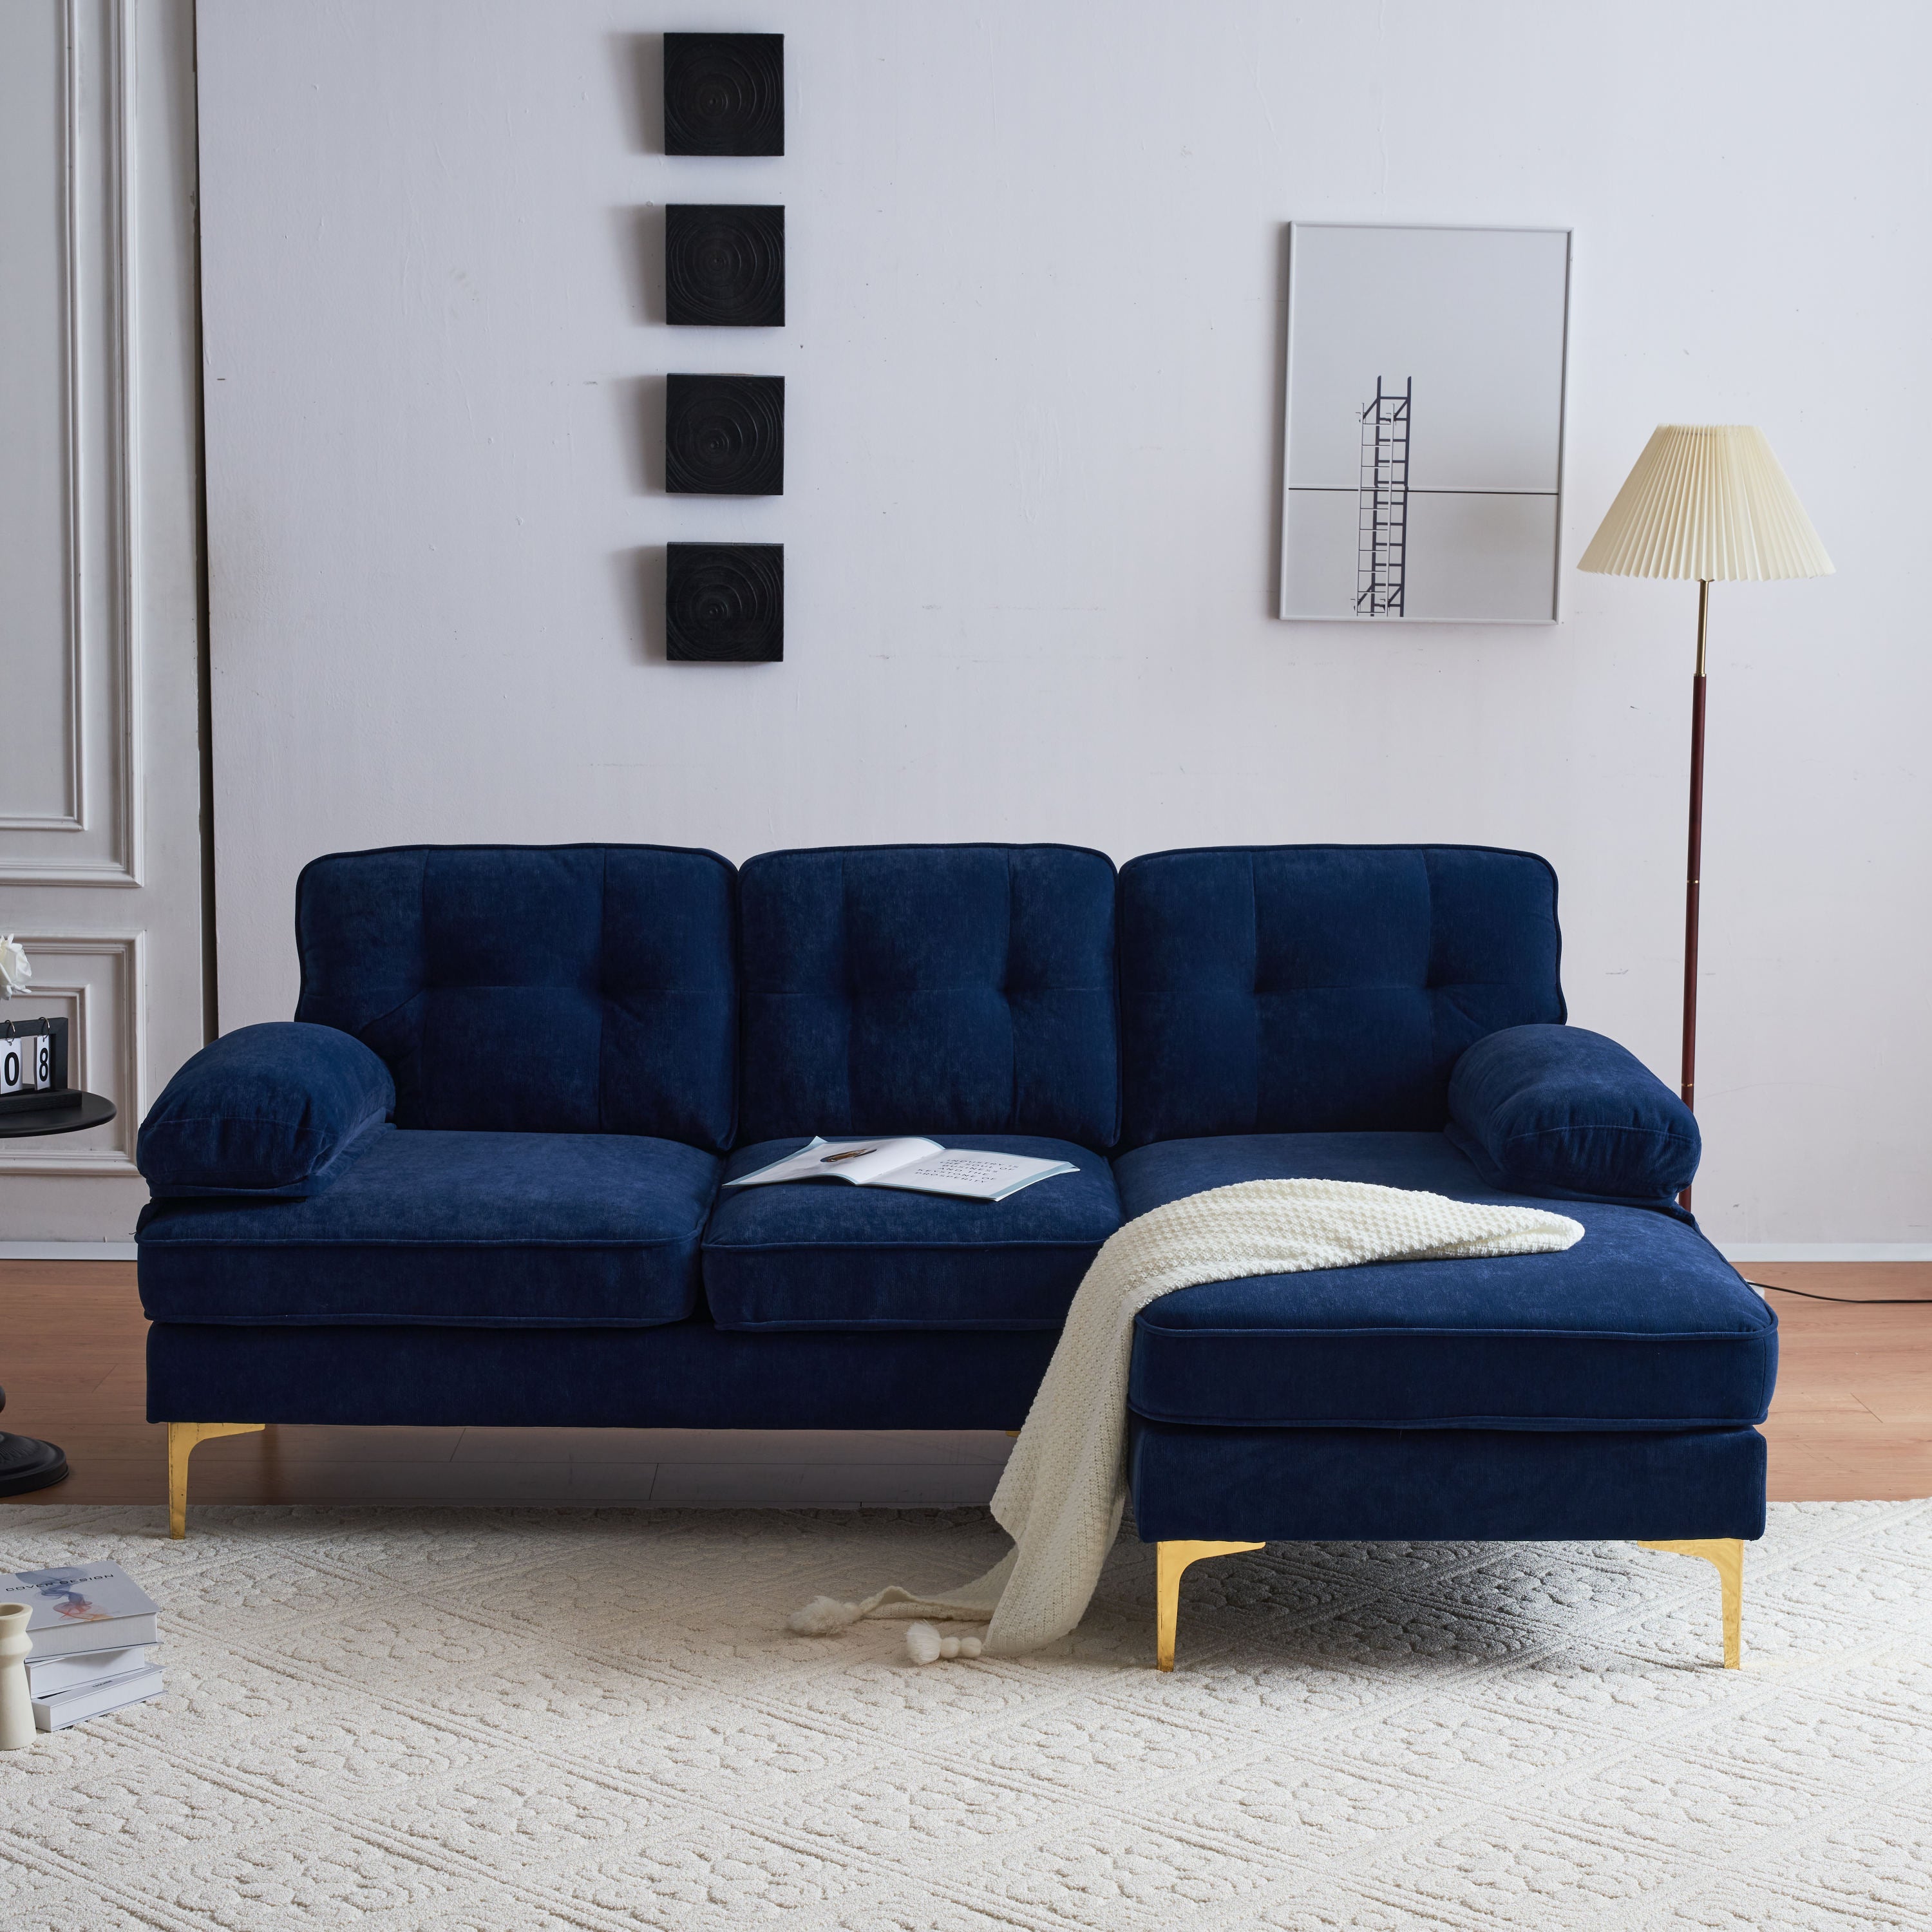 Modern Velvet L-Shaped Sectional Sofas for Living Room, Bedroom | Stylish and Comfortable | Blue | Ideal Addition to Your Home Decor-Stationary Sectionals-American Furniture Outlet